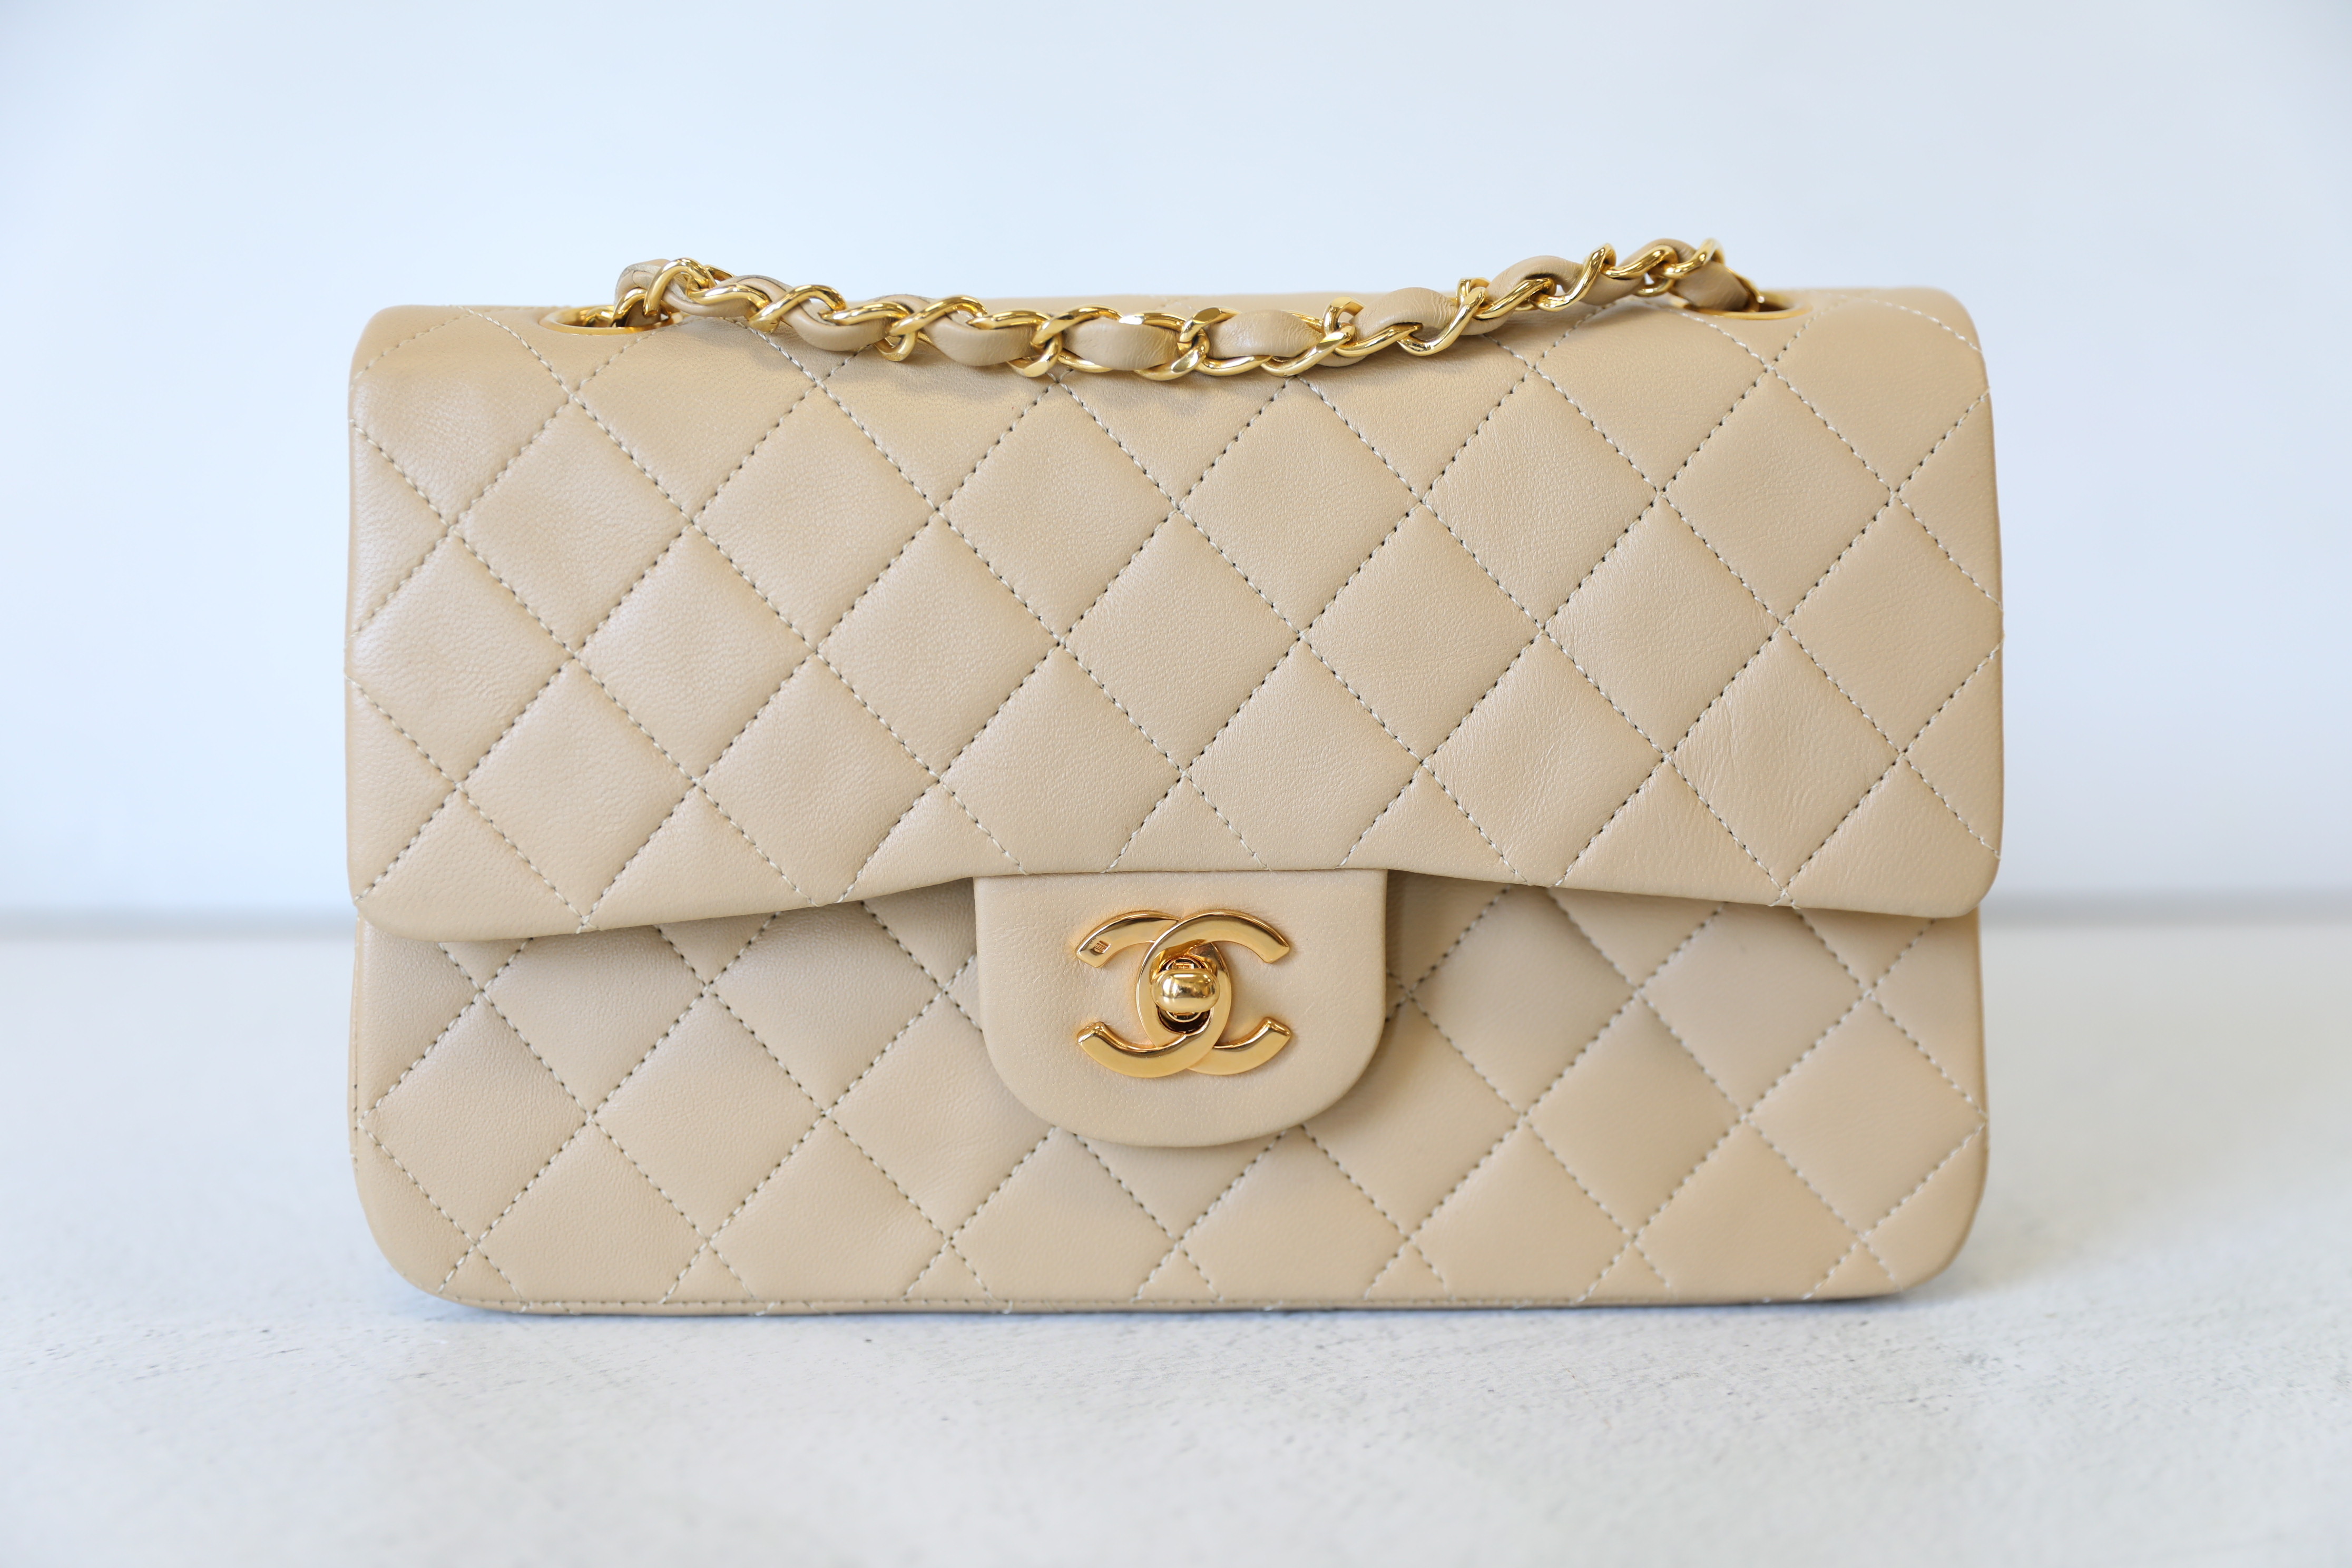 Chanel Vintage Small Flap, Beige Lambskin with Gold Hardware